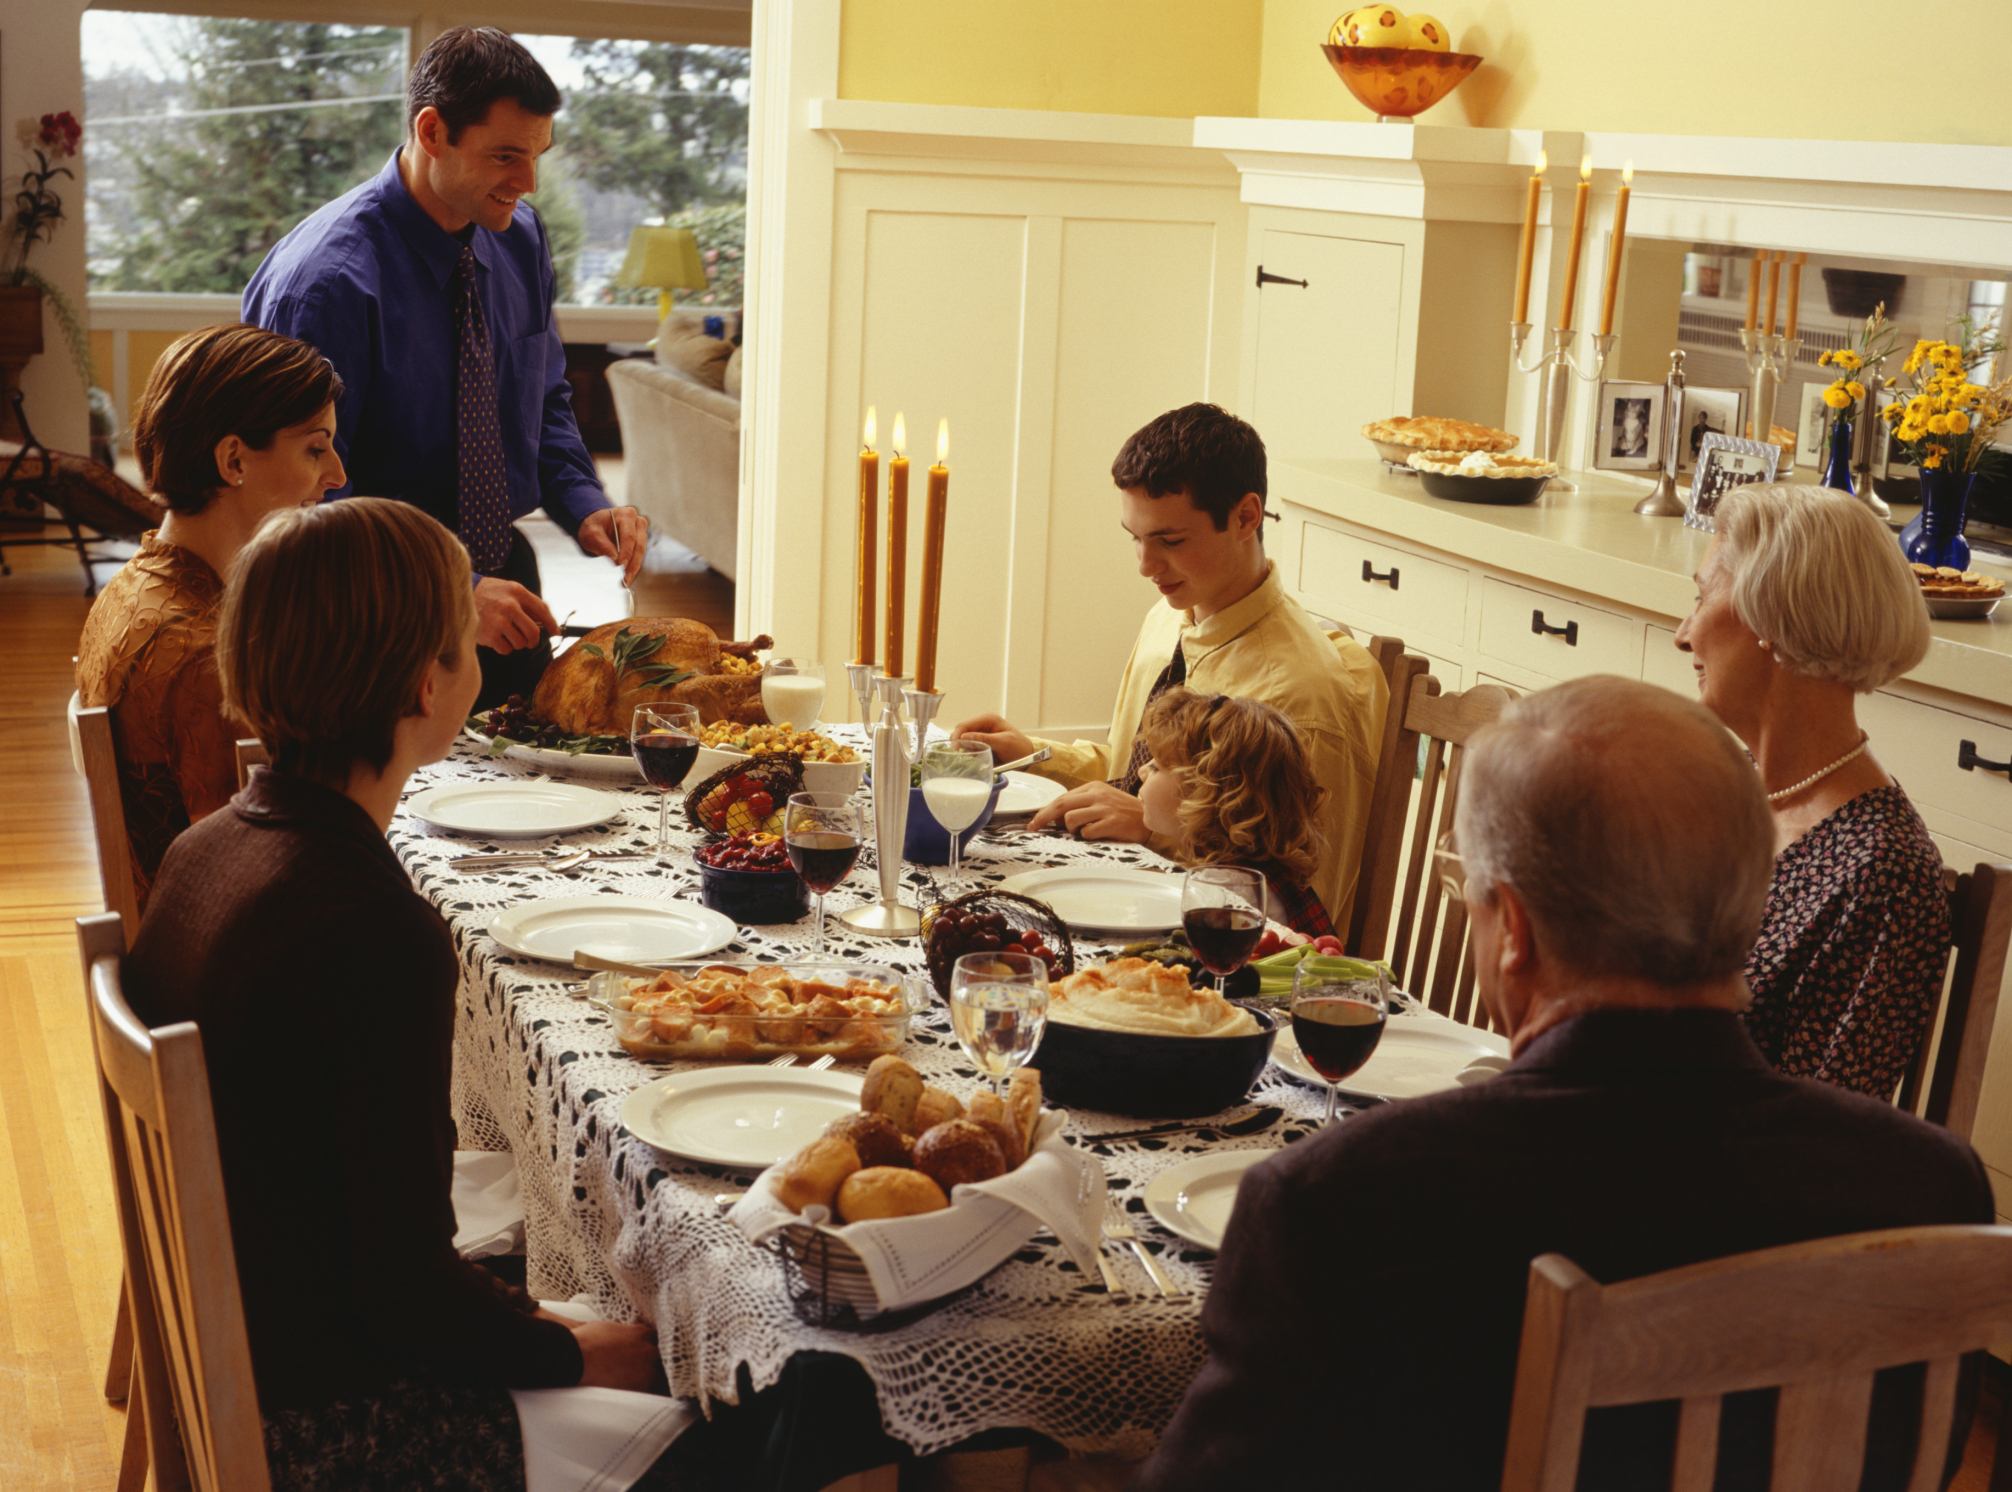 Tips to deal with family dysfunction during Thanksgiving